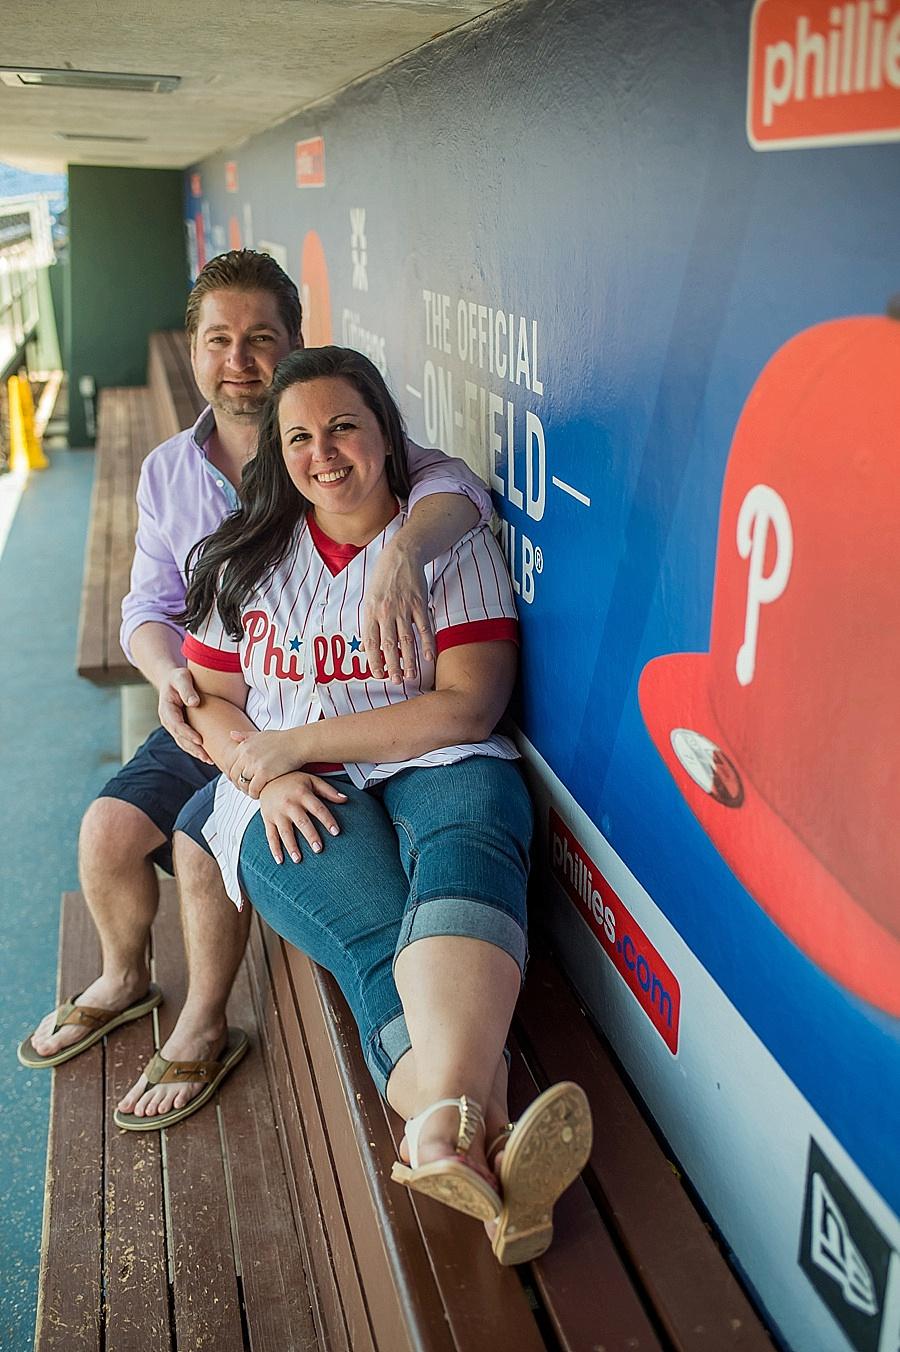 Citizens Bank Park Engagement Session by Melissa Kelly Photography Philly In Love Philadelphia Weddings 